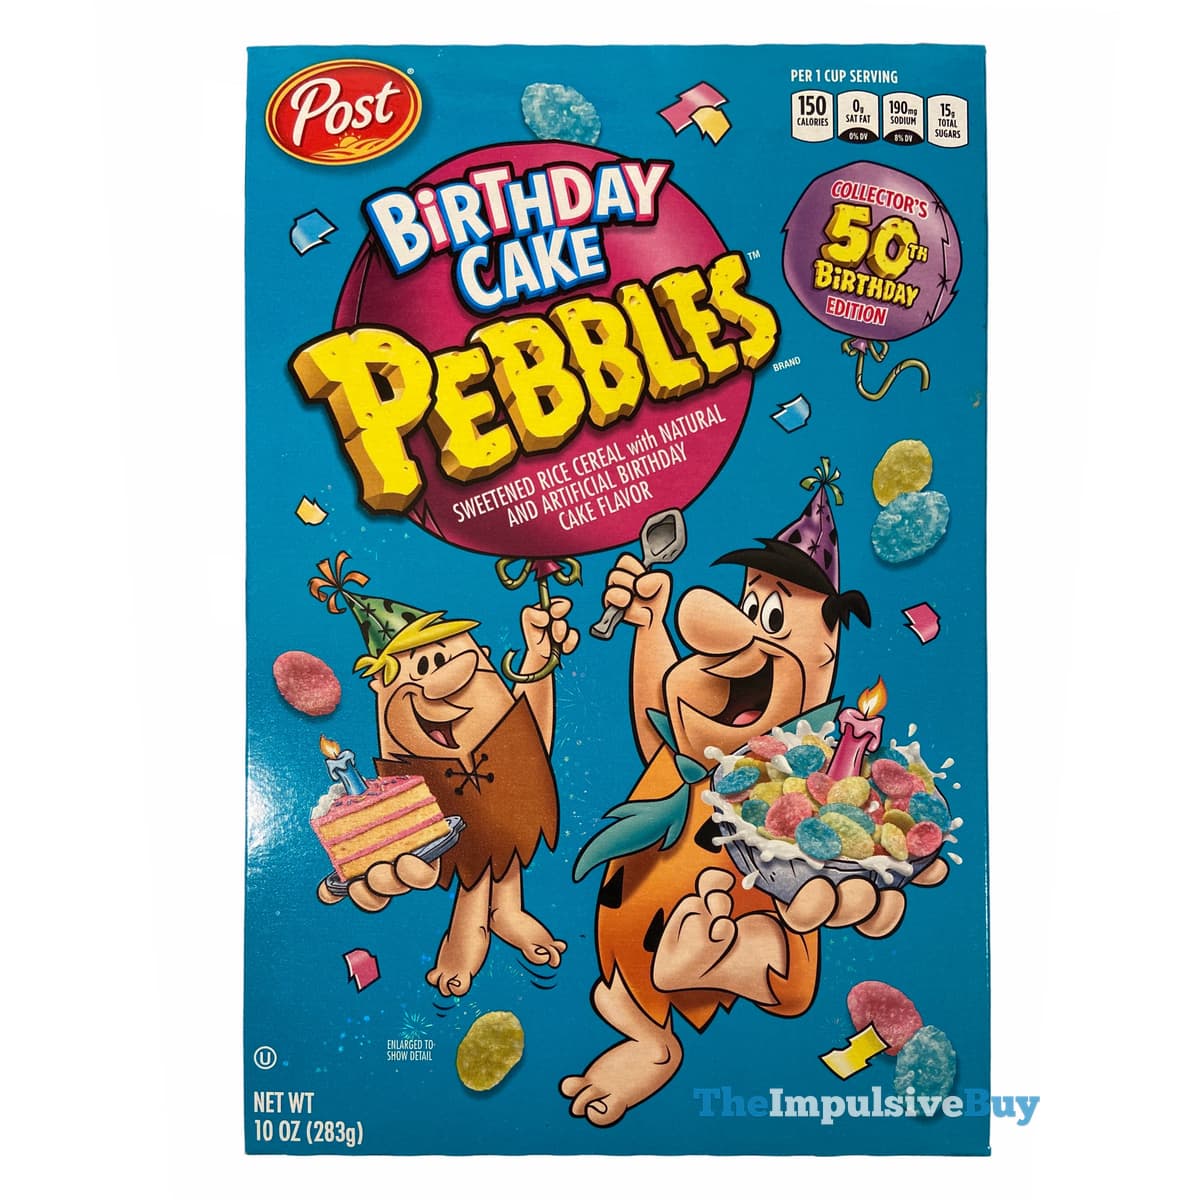 REVIEW Post Birthday Cake Pebbles Cereal The Impulsive Buy